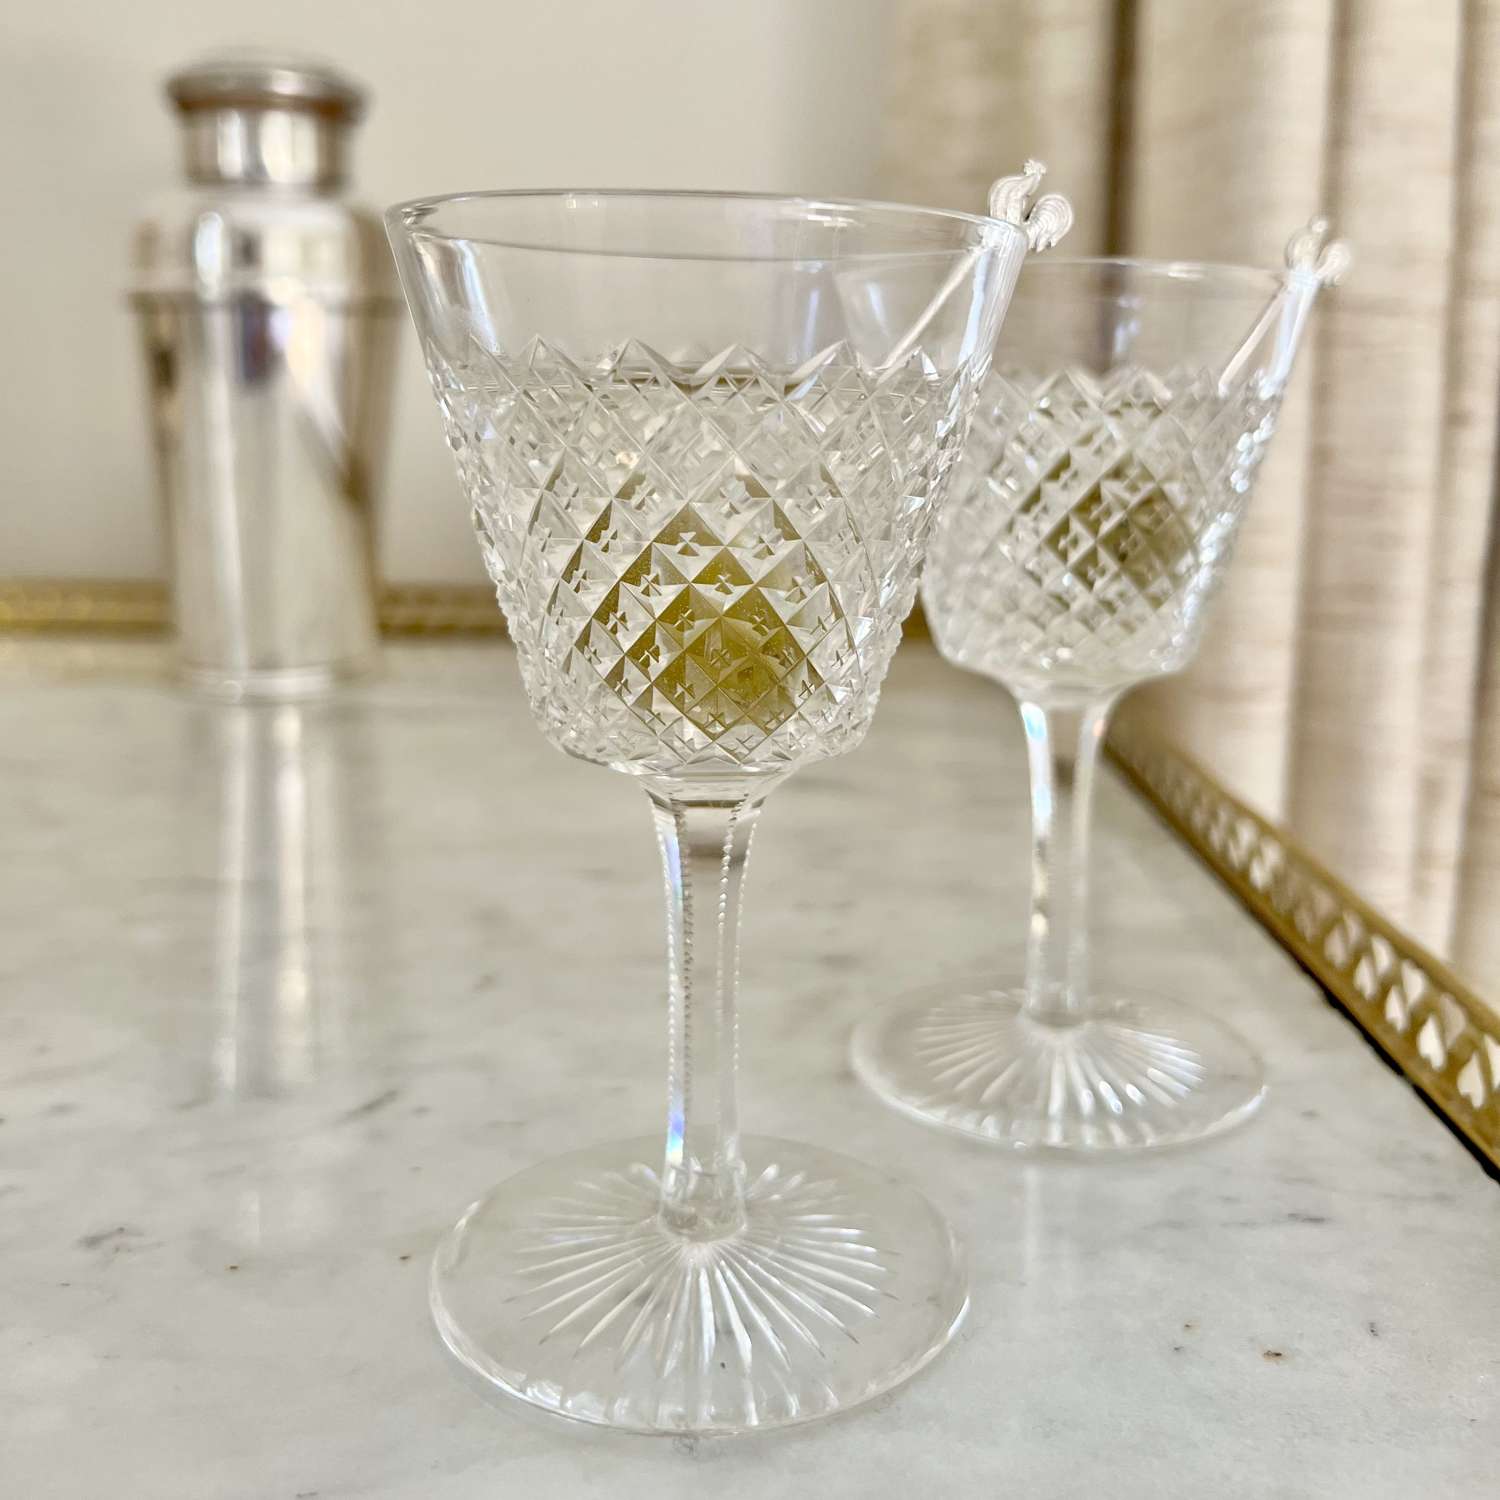 Set of 8 Victorian lead crystal drinking glasses